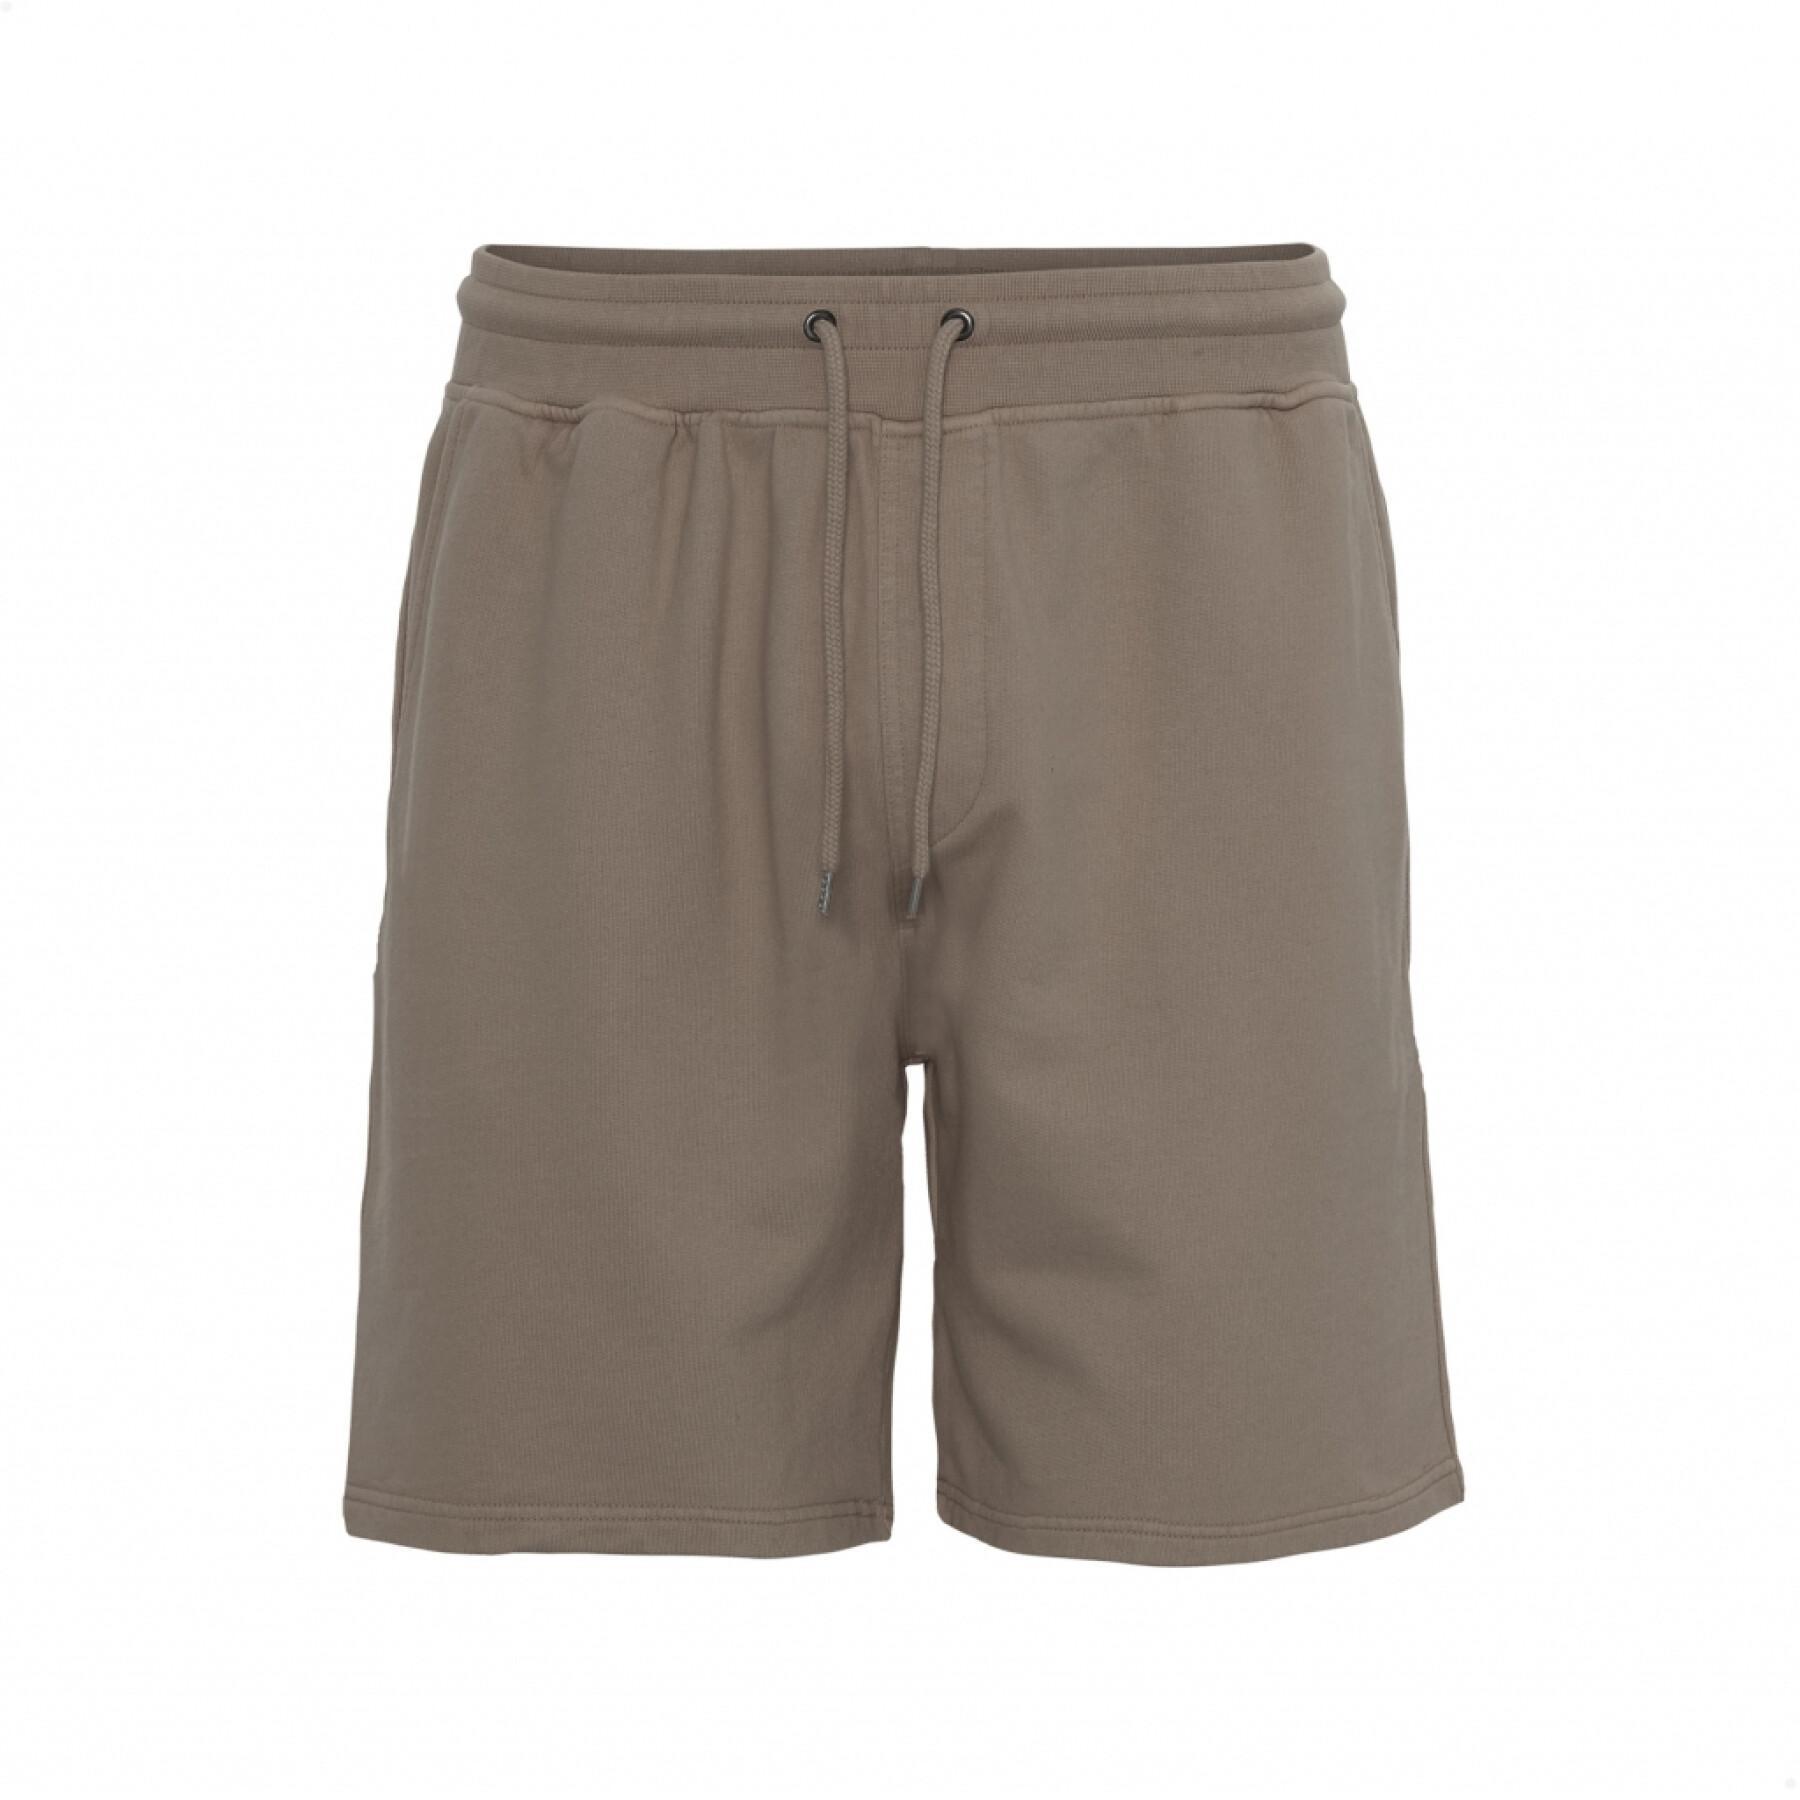 Short Colorful Standard Classic Organic warm taupe